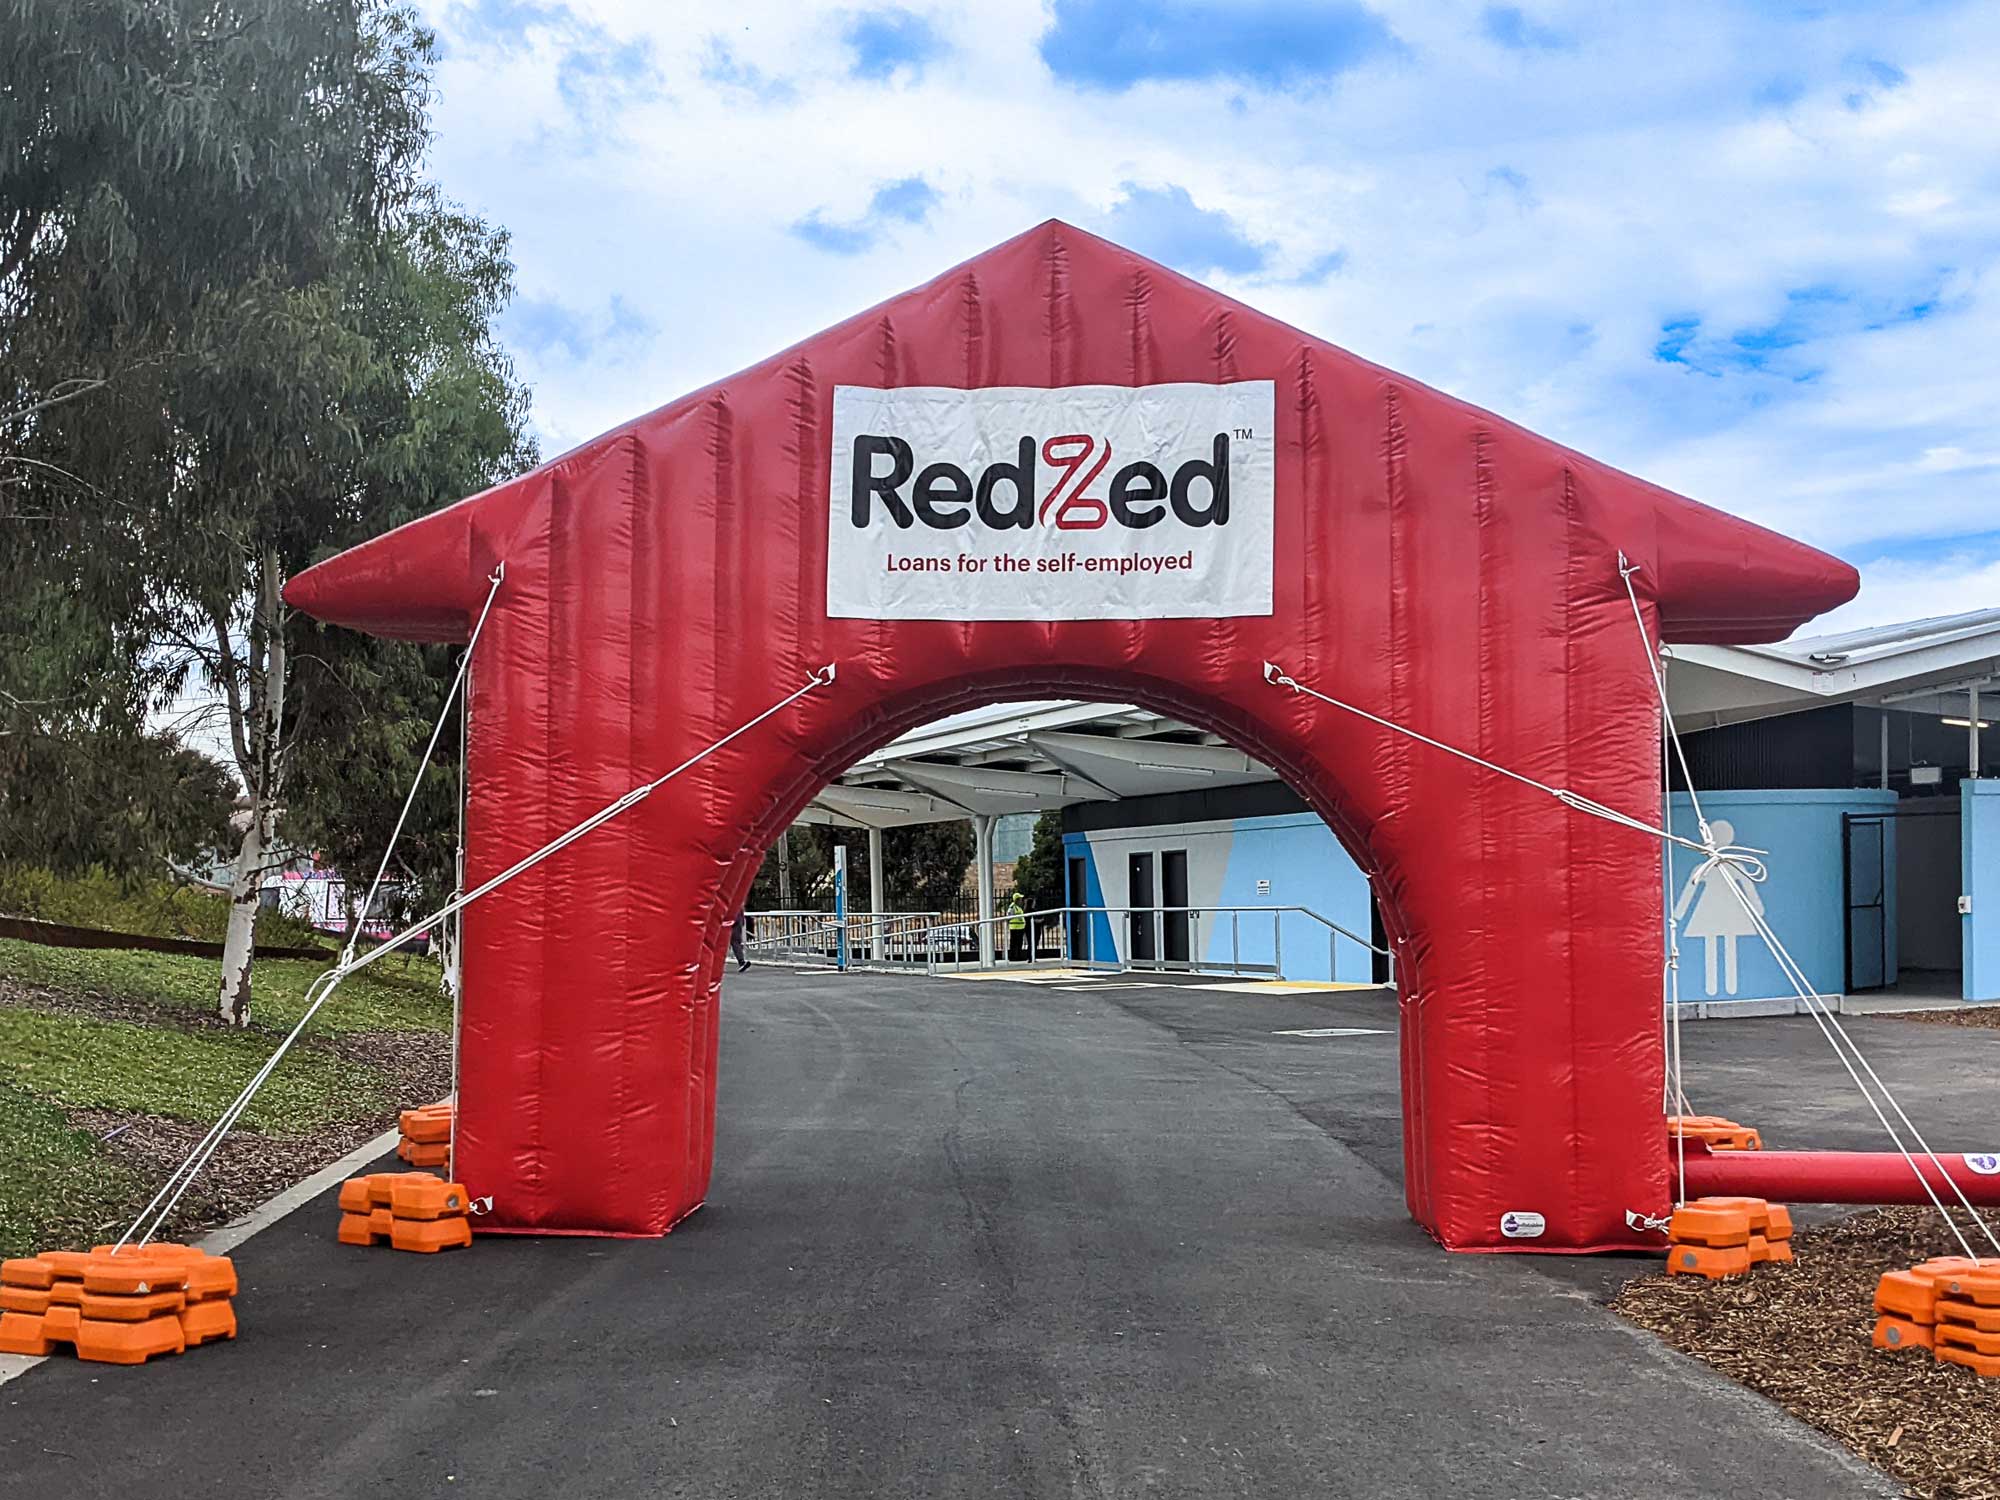 After three years of regular use, the RedZed arch remains a key marketing tool for RedZed.